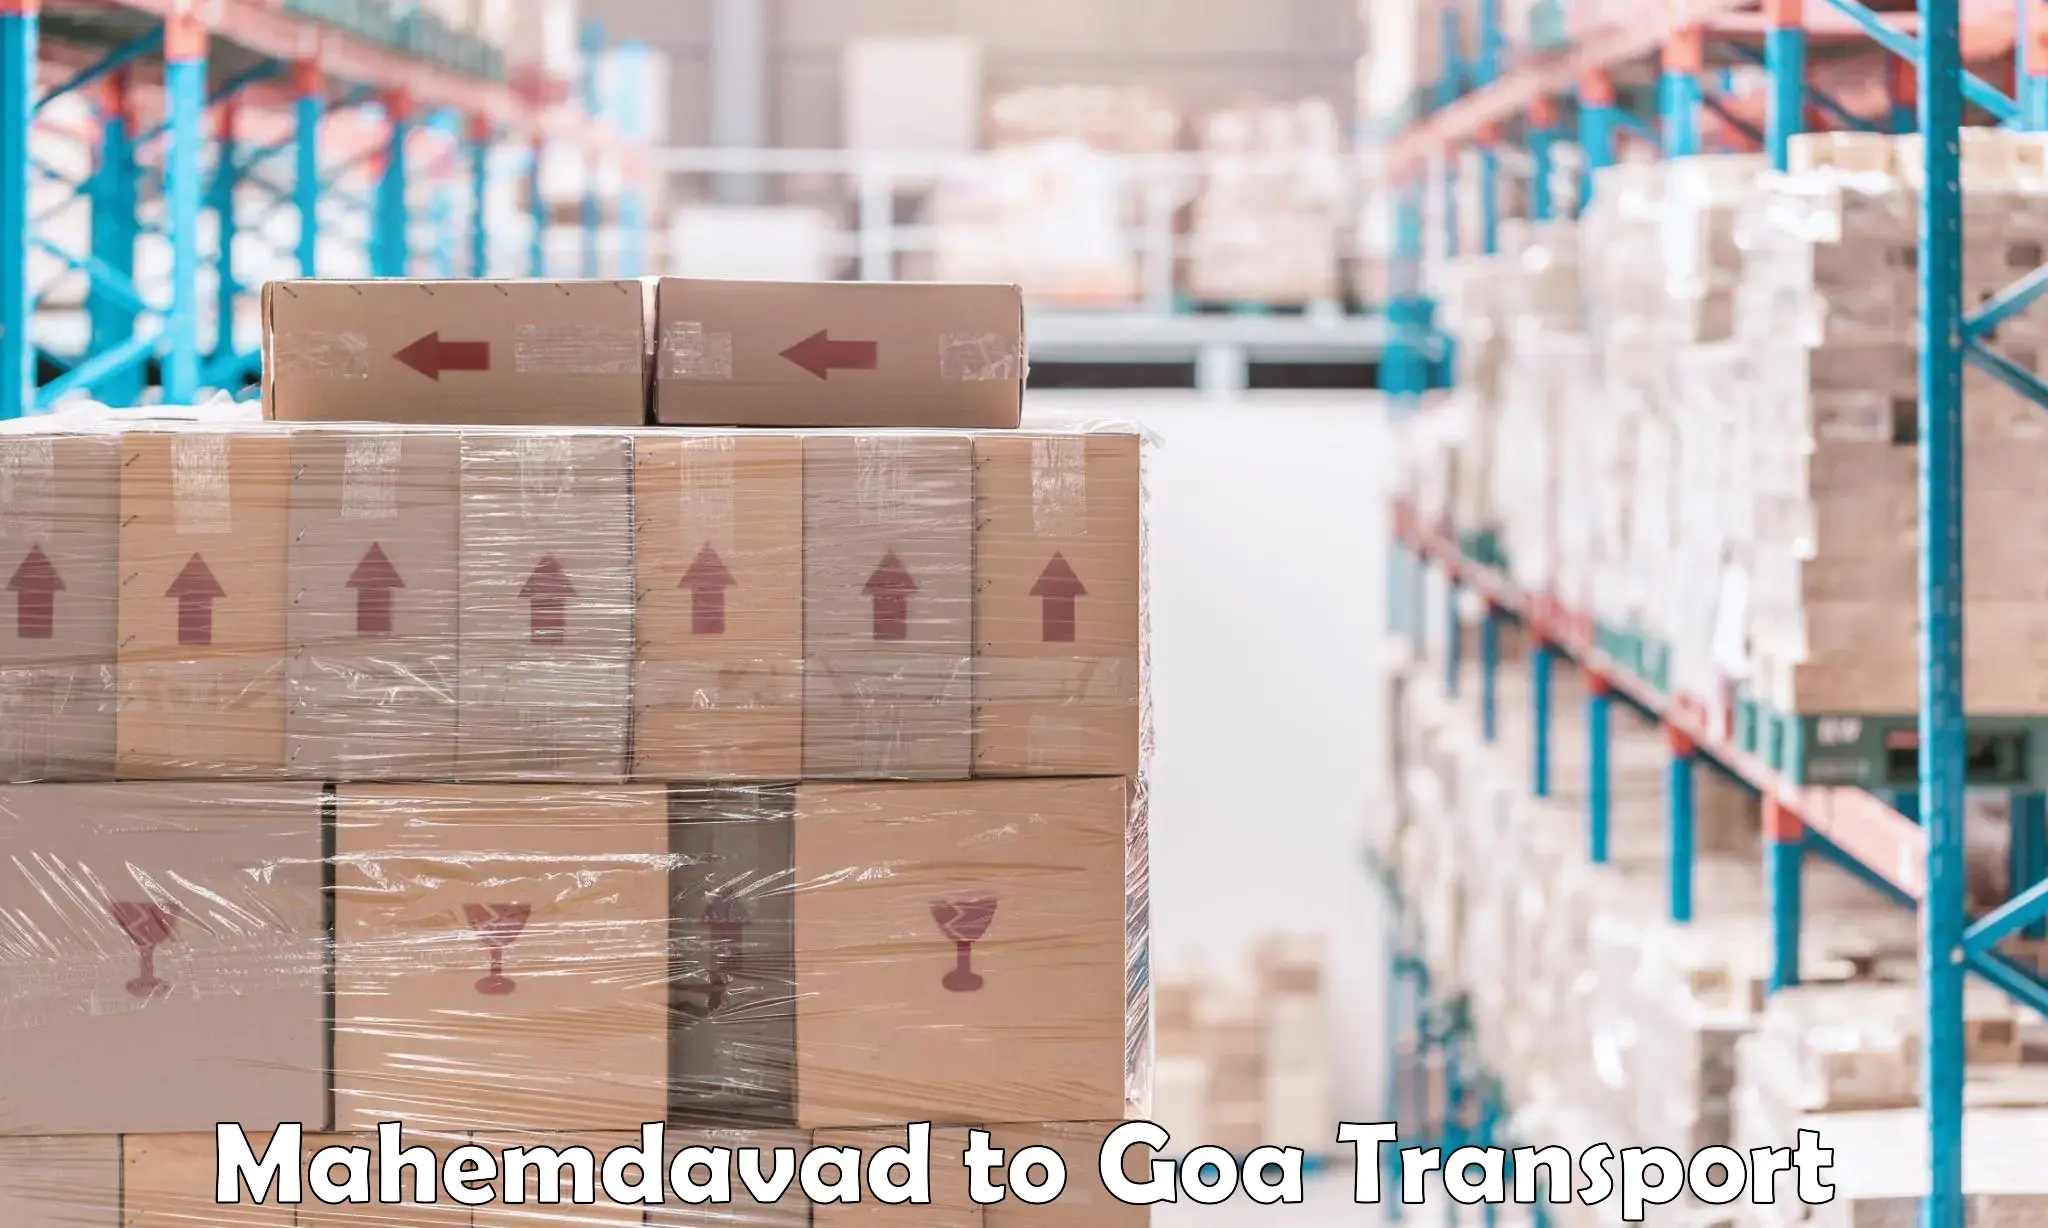 Container transport service Mahemdavad to IIT Goa